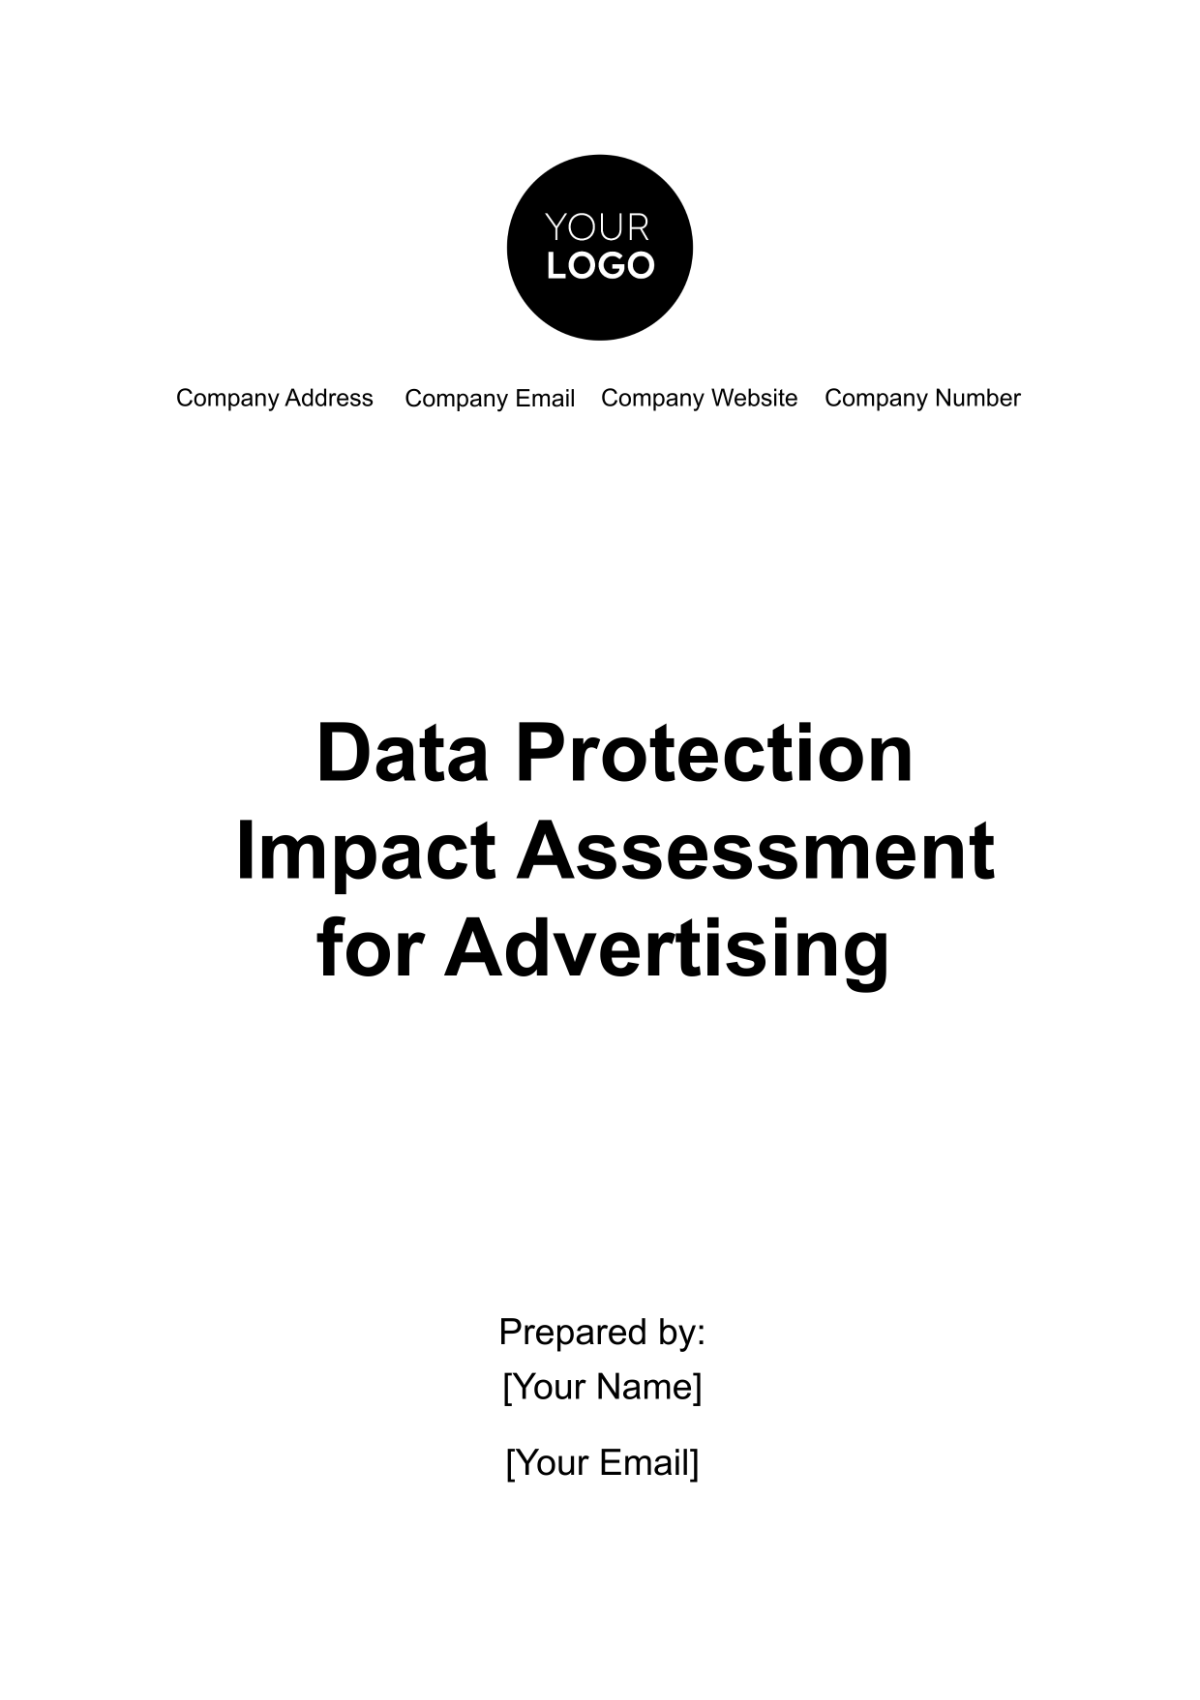 Data Protection Impact Assessment for Advertising Template